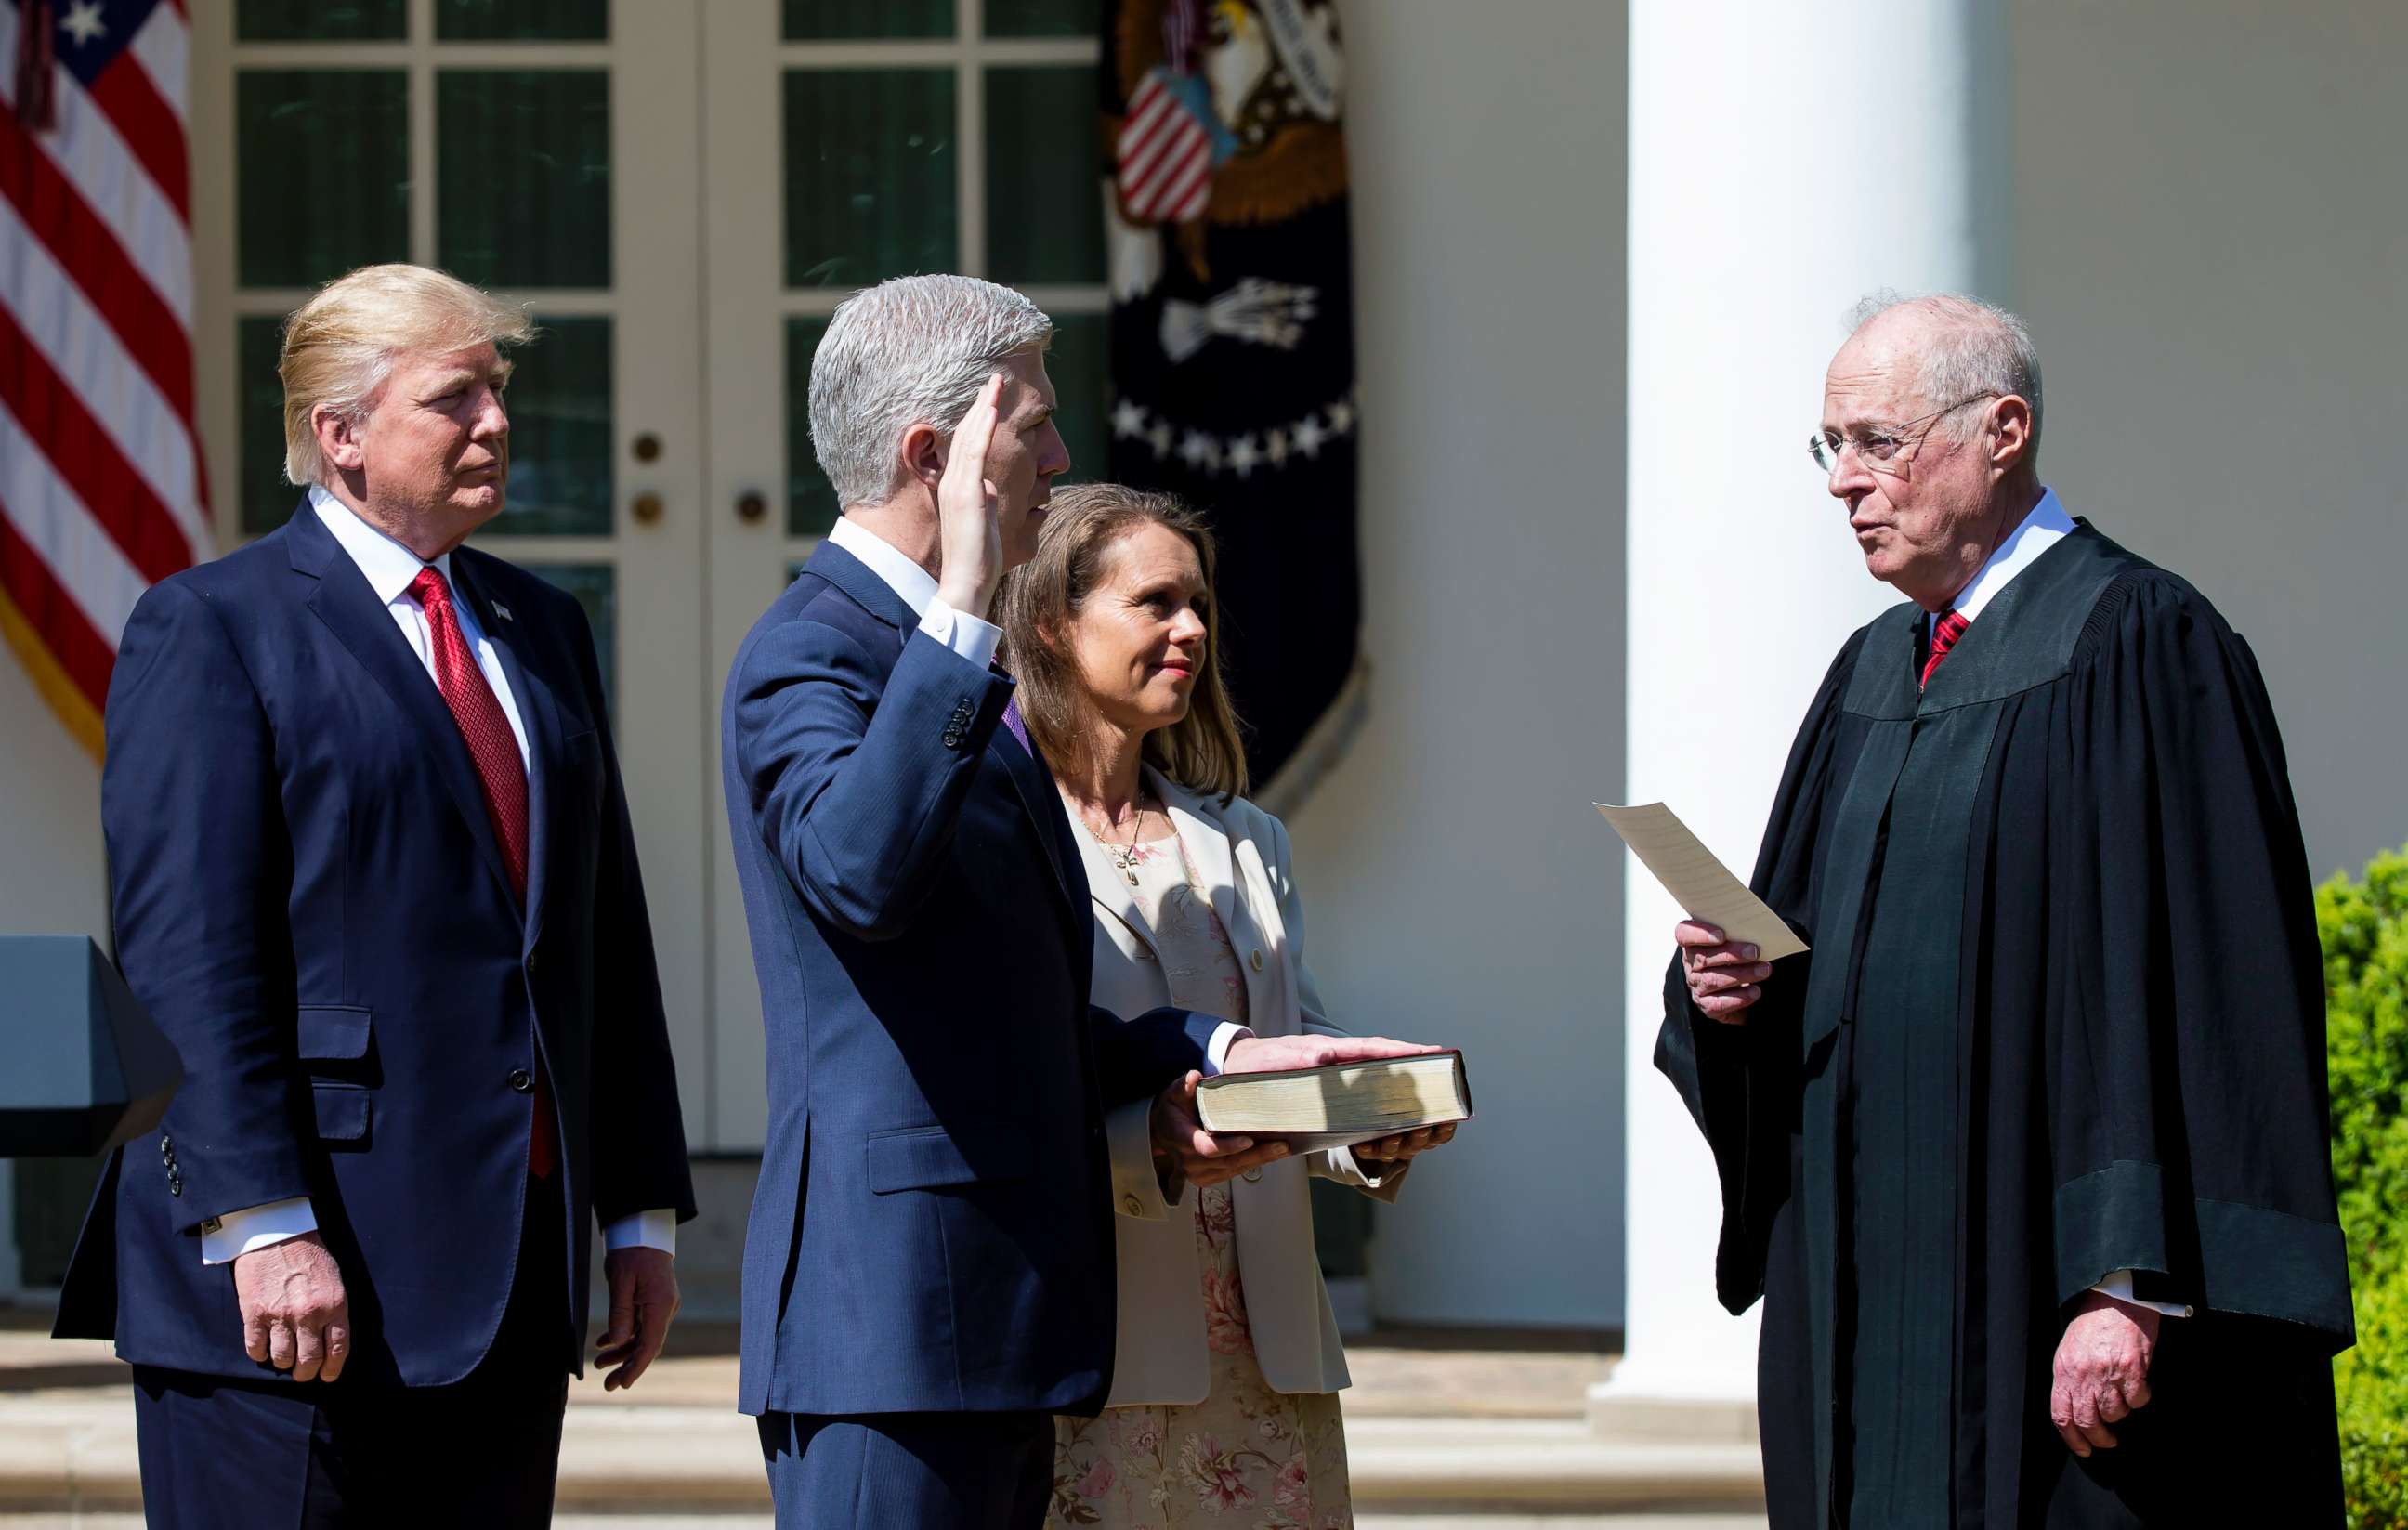 PHOTO: Supreme Court Associate Justice Anthony Kennedy administers the judicial oath to Judge Neil Gorsuch as President Donald Trump looks on during a ceremony in the Rose Garden at the White House, April 10, 2017 in Washington, D.C.